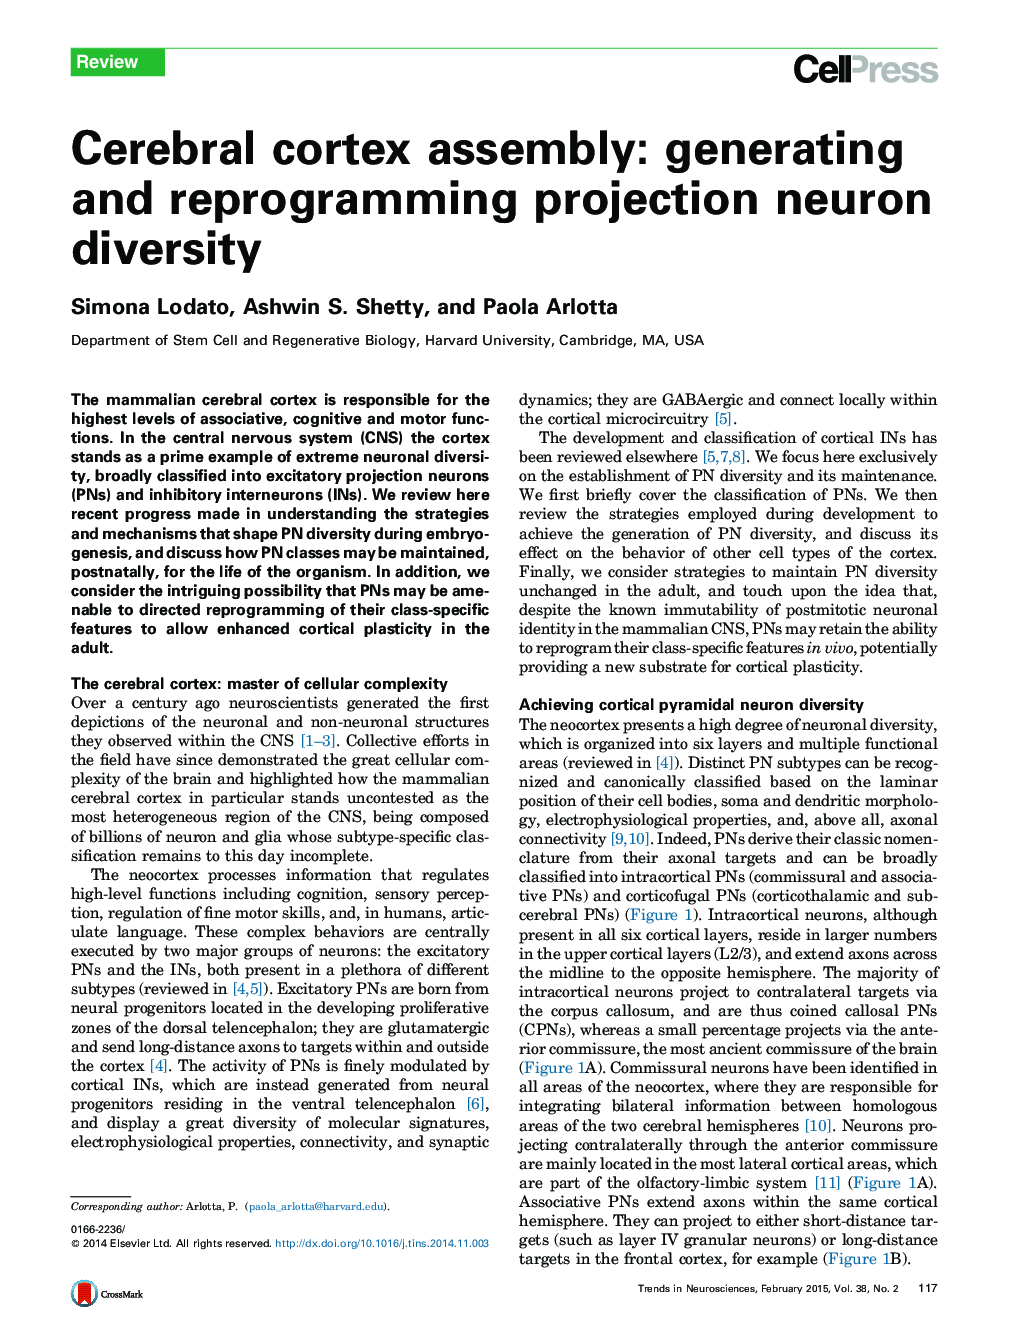 Cerebral cortex assembly: generating and reprogramming projection neuron diversity